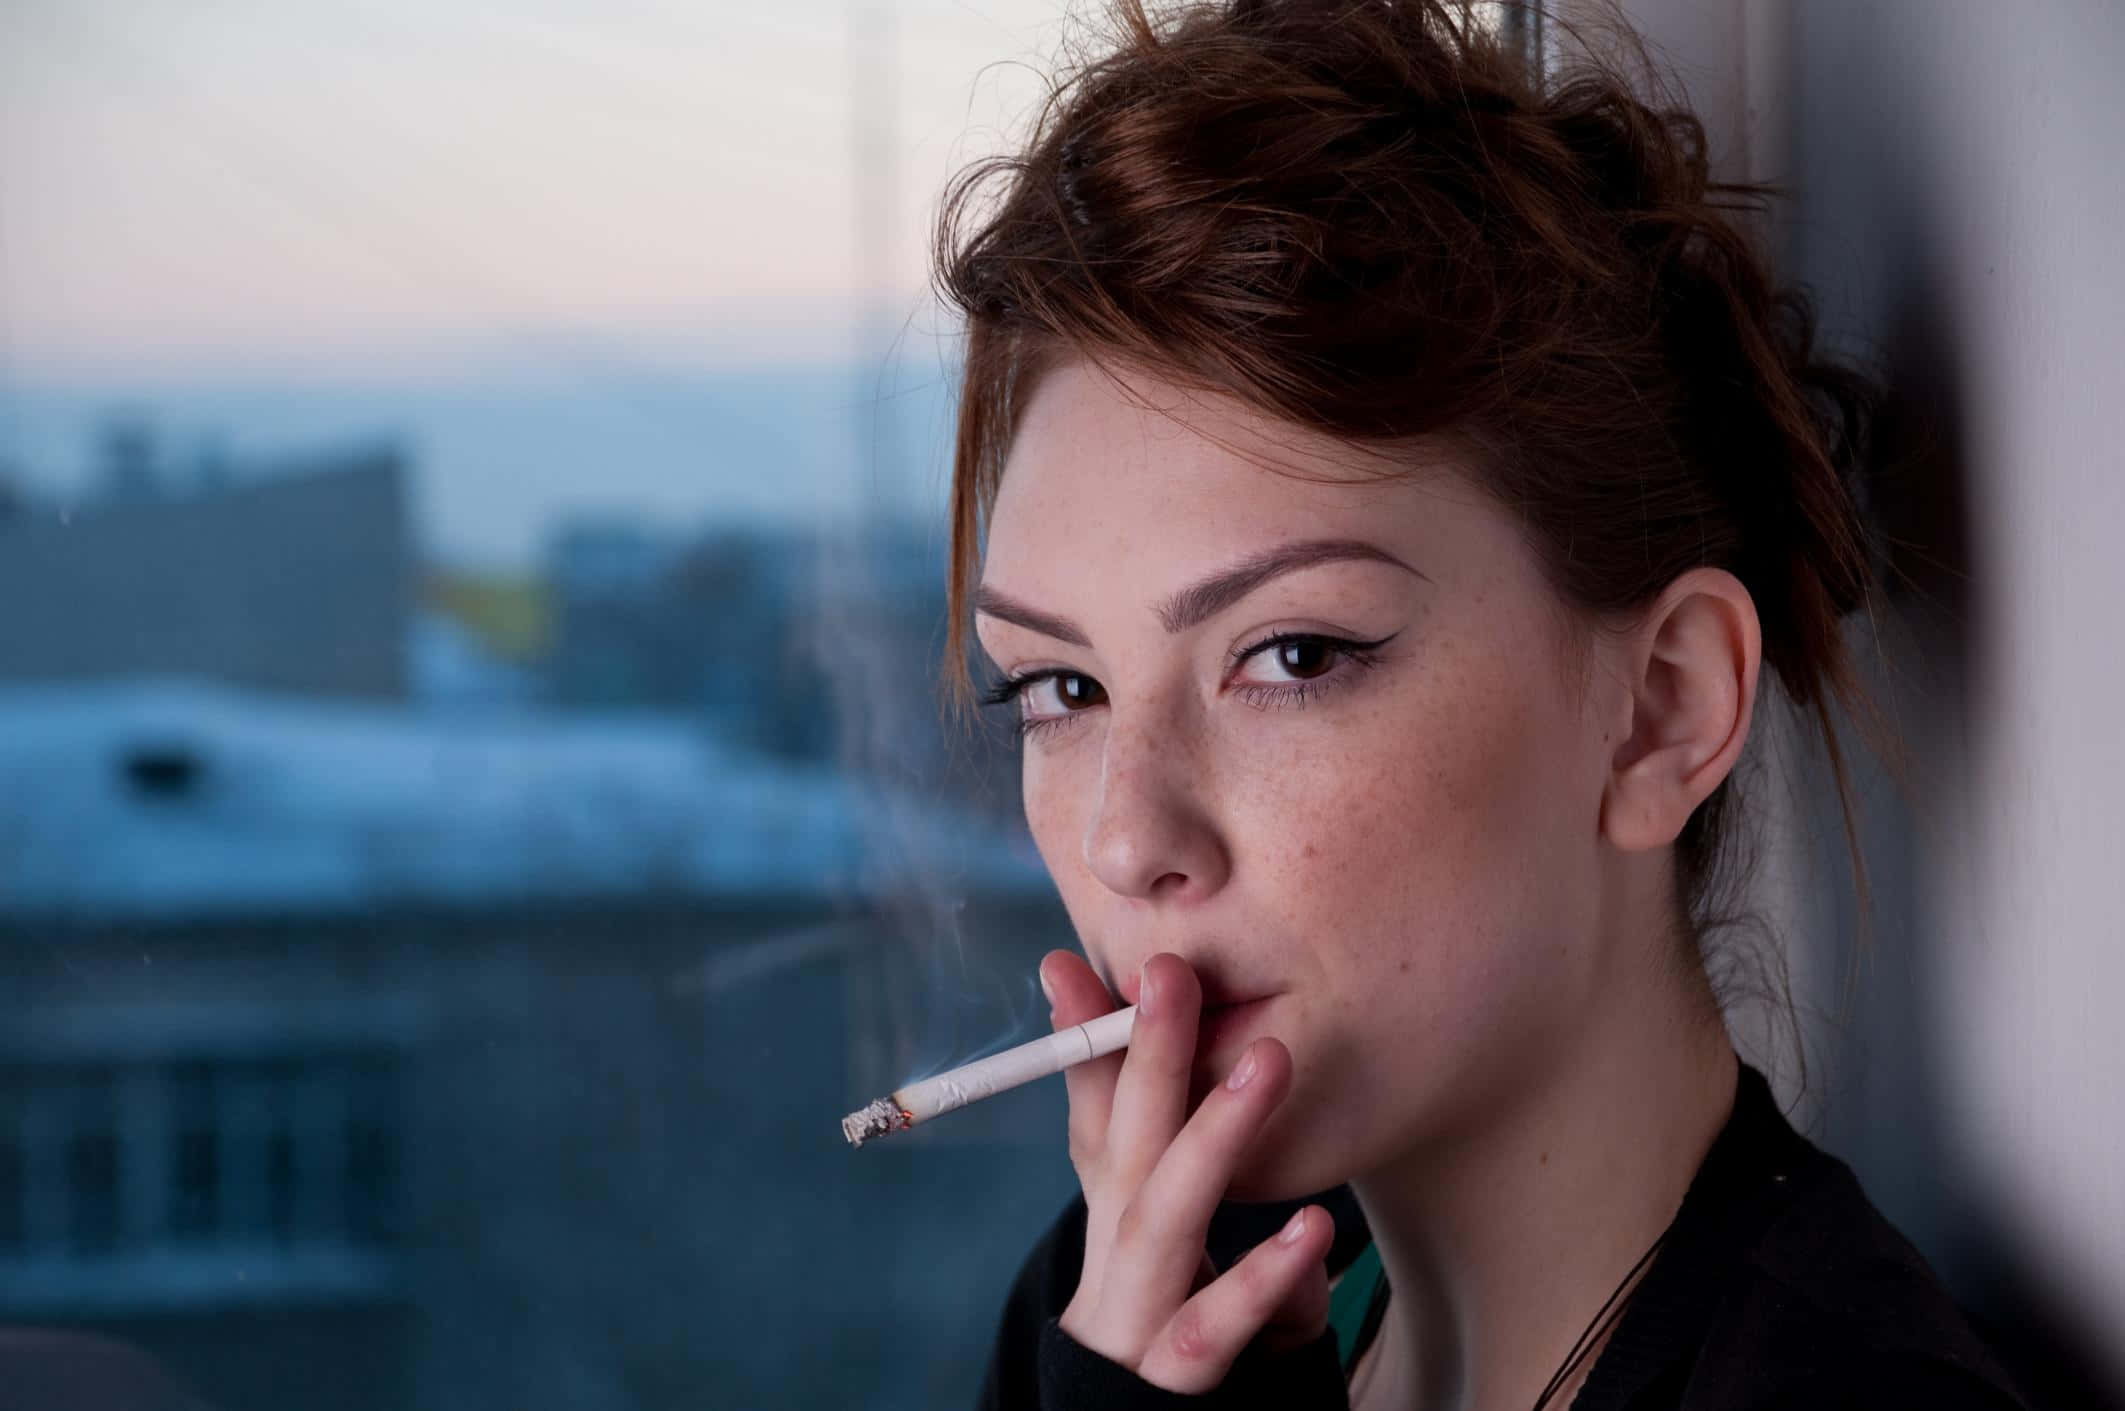 A woman smoking a cigarette on a rooftop